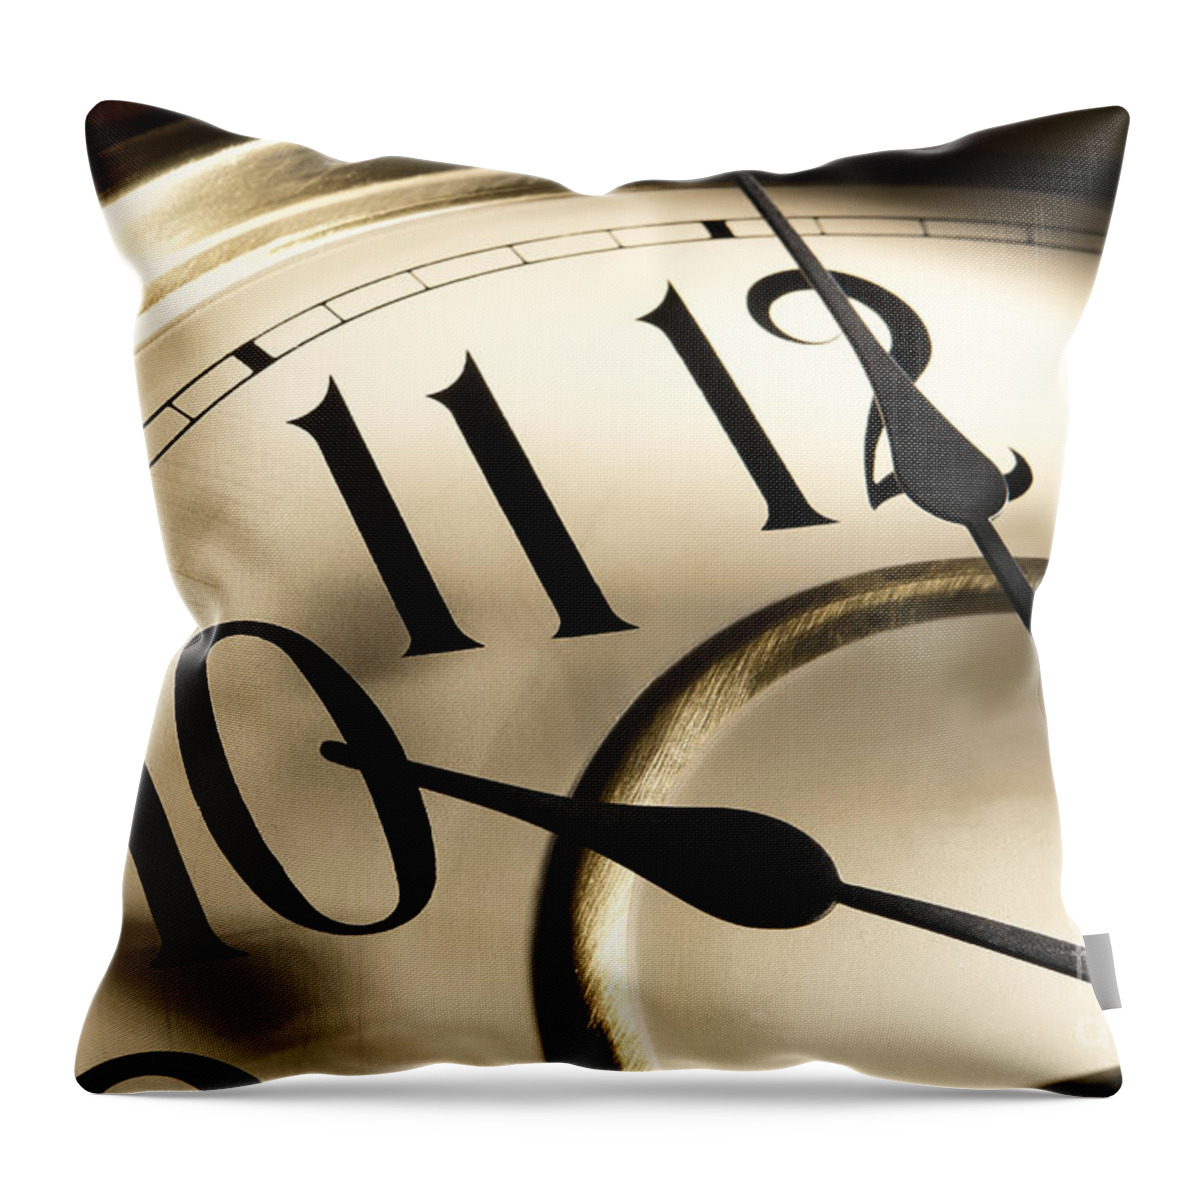 Clock Throw Pillow featuring the photograph Time Goes By by Olivier Le Queinec